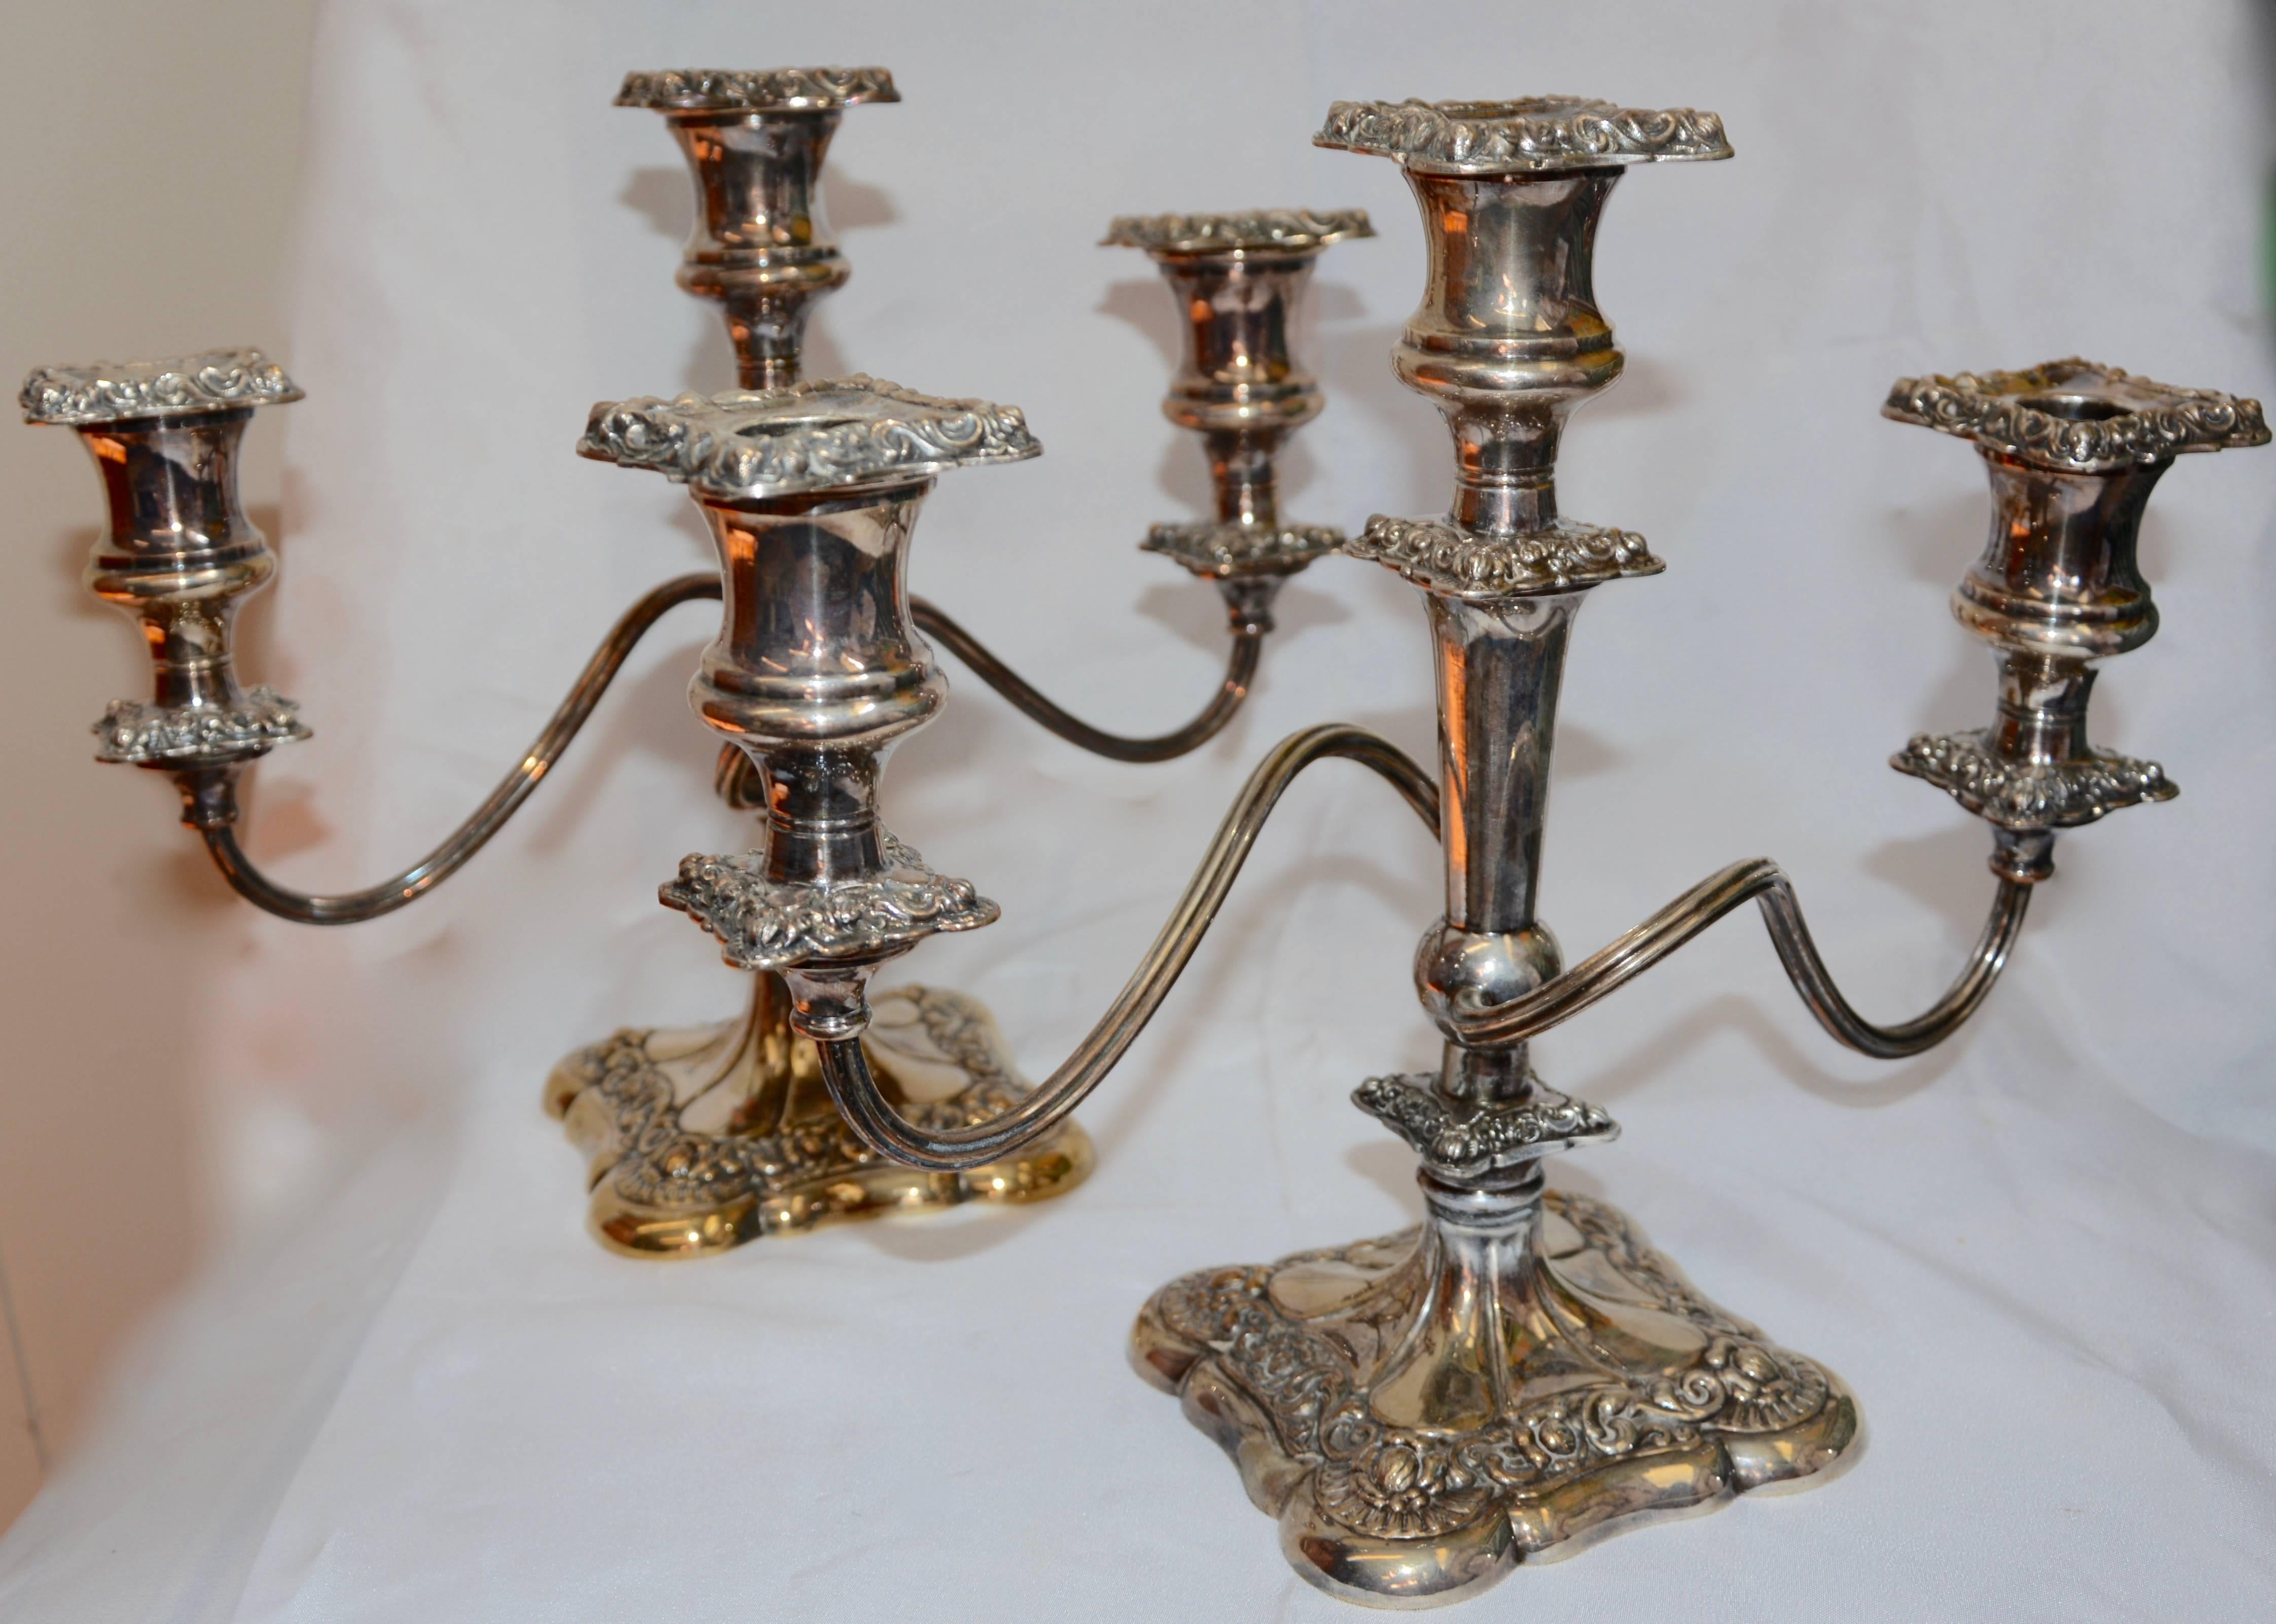 Featured is a fabulous pair of candelabras by Elizur G. Webster and Sons of International Silver Co. Each candelabrum features three arms with two of those mounted on gracefully curved arms. The details on these pieces have been very well done.